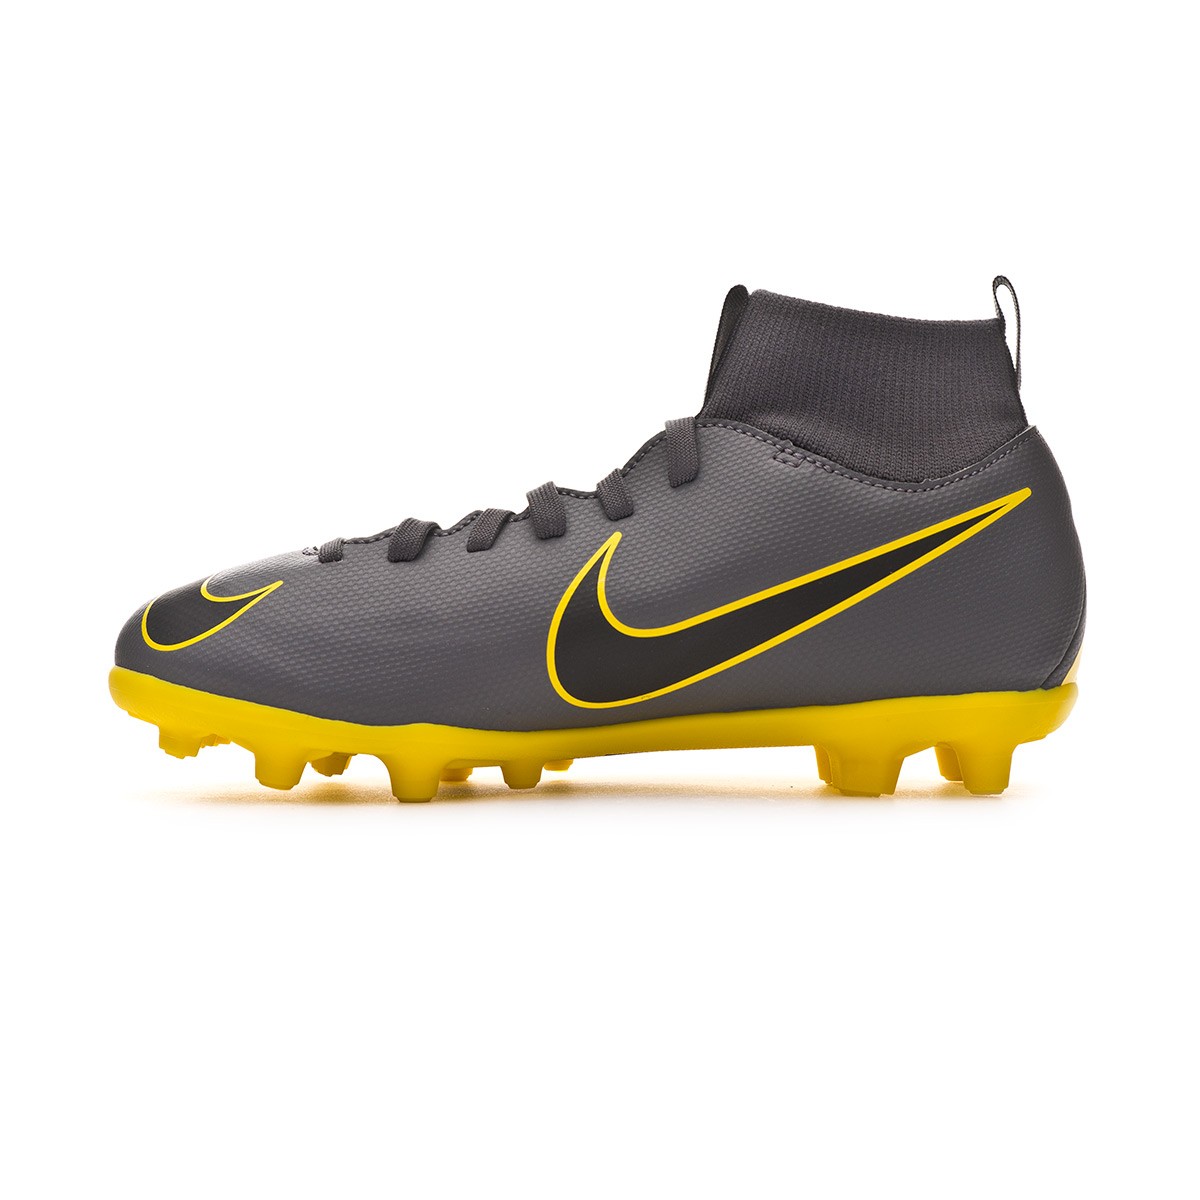 Football boots for boys Nike Mercurial Superfly 6 Club TF.